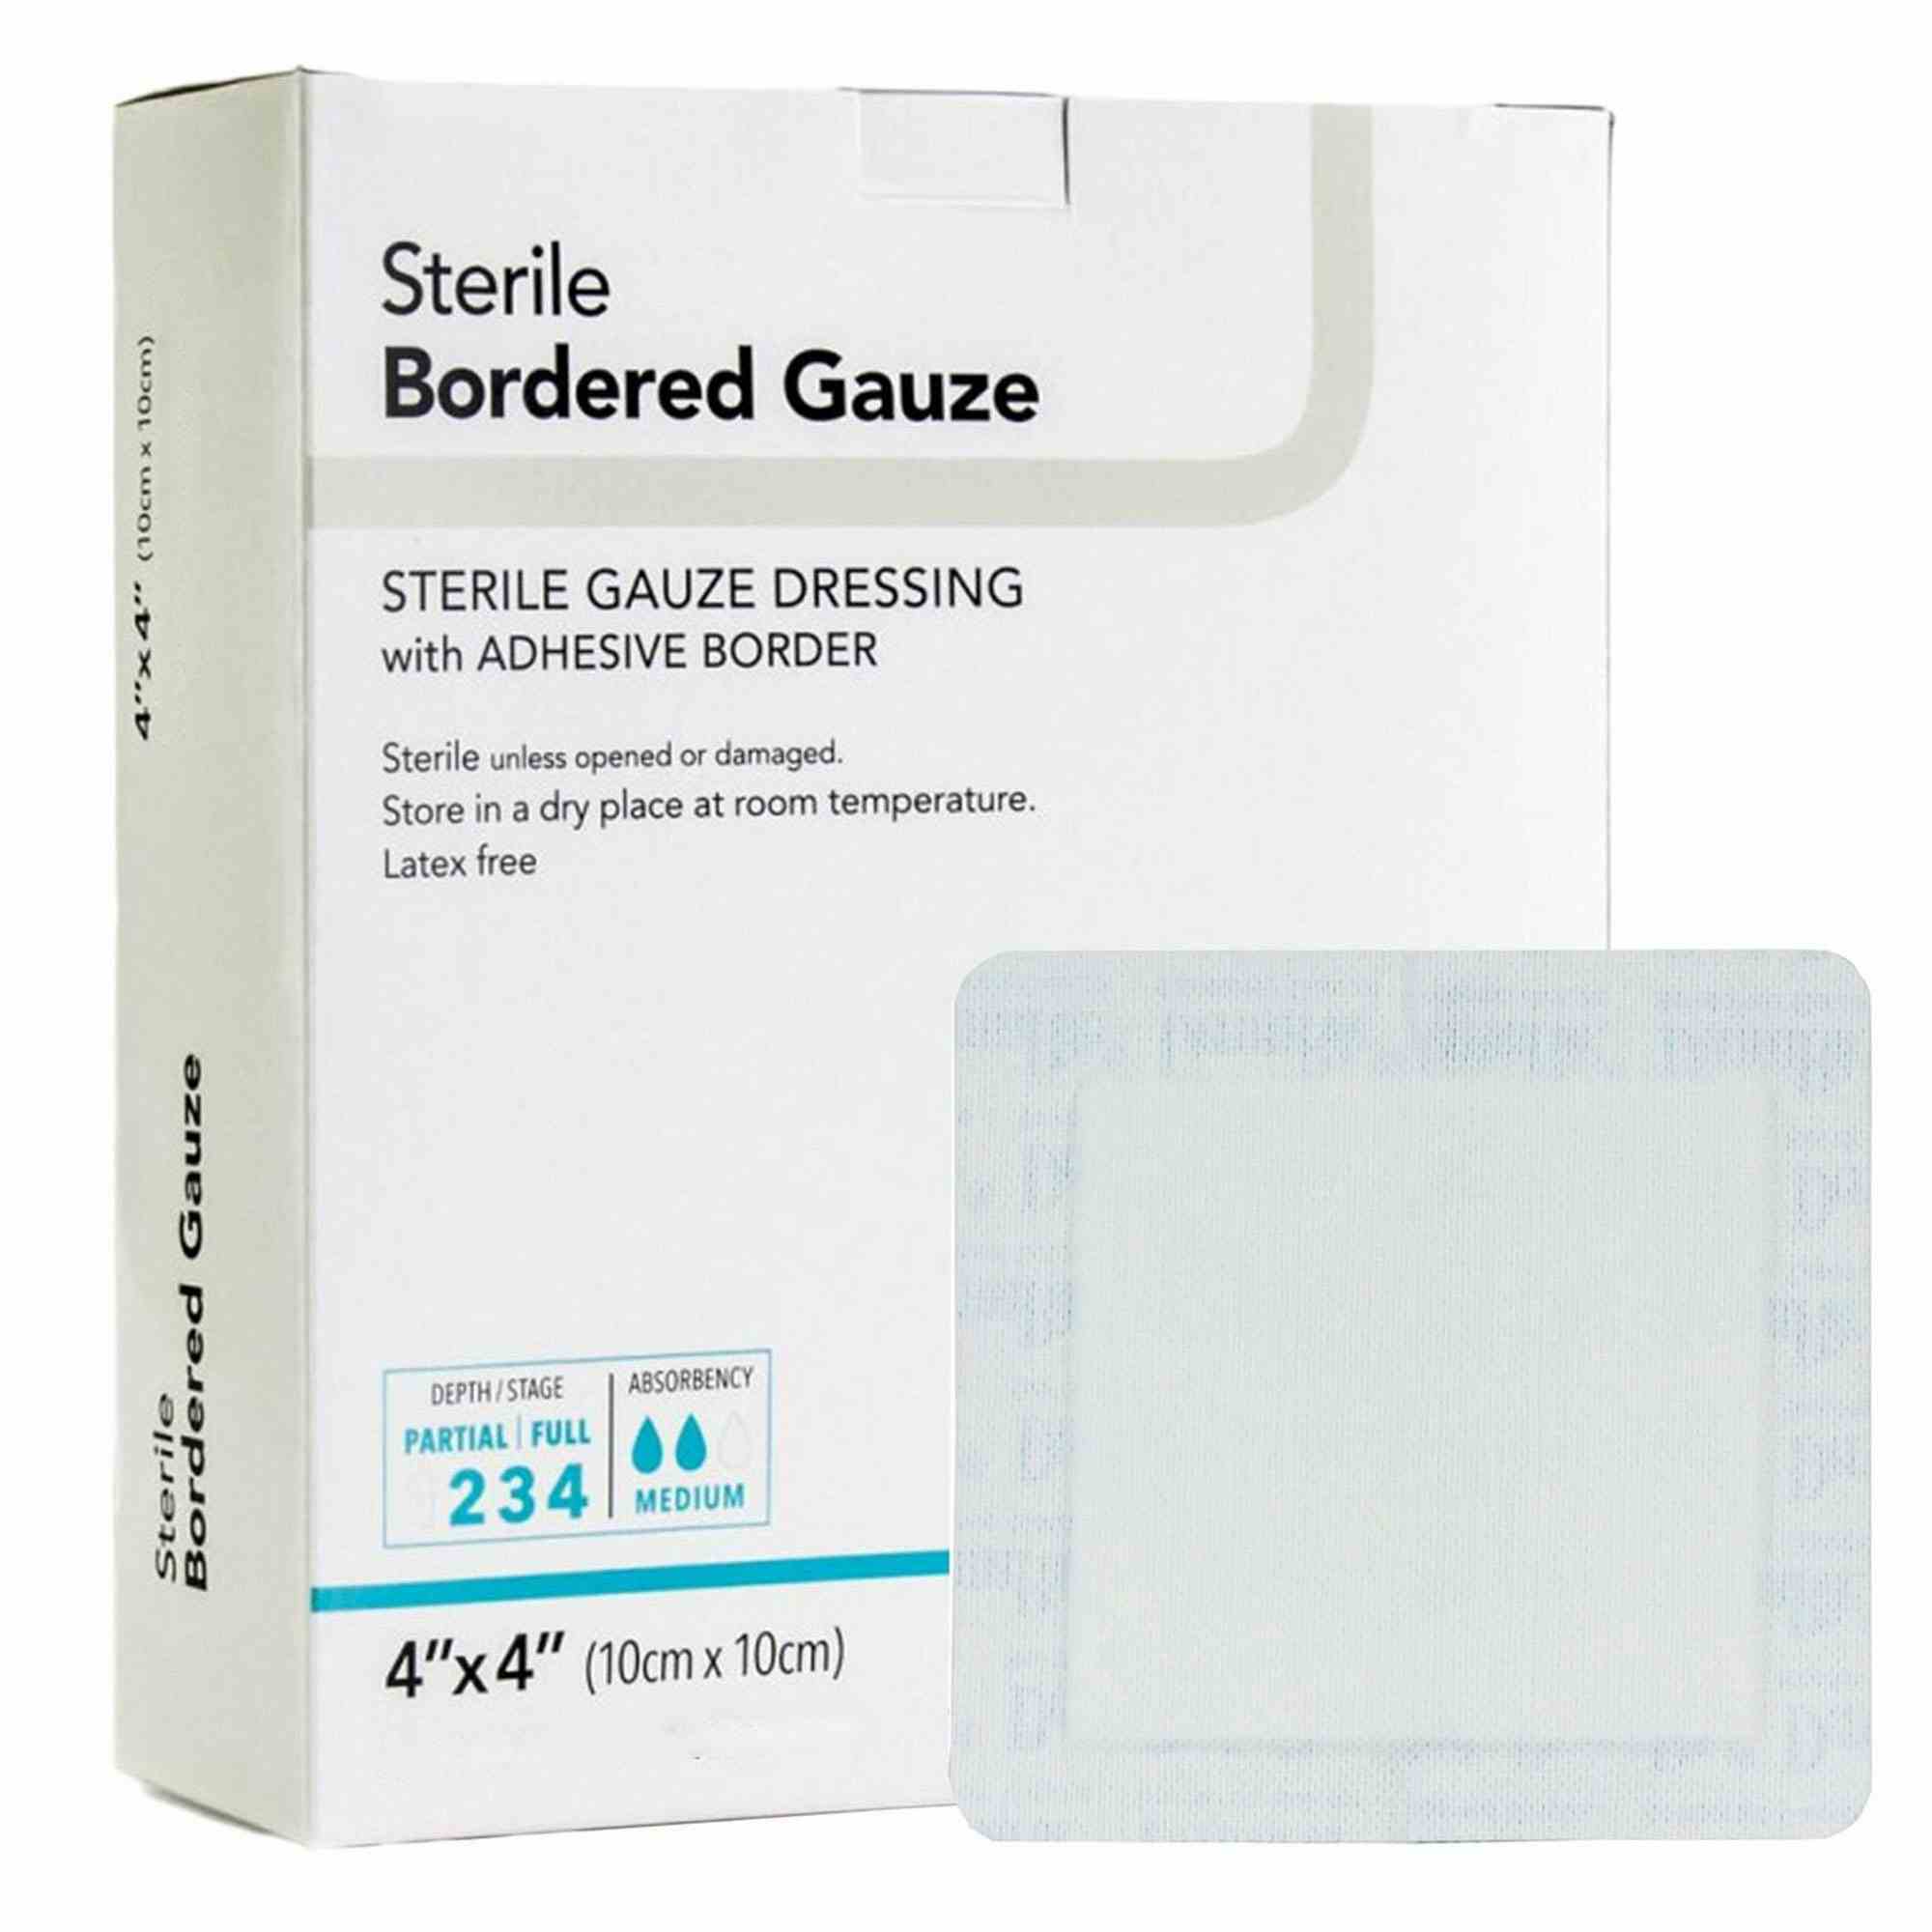 DermaRite Sterile Gauze Dressing with Adhesive Border, 4 X 4", 00255, Pack of 100